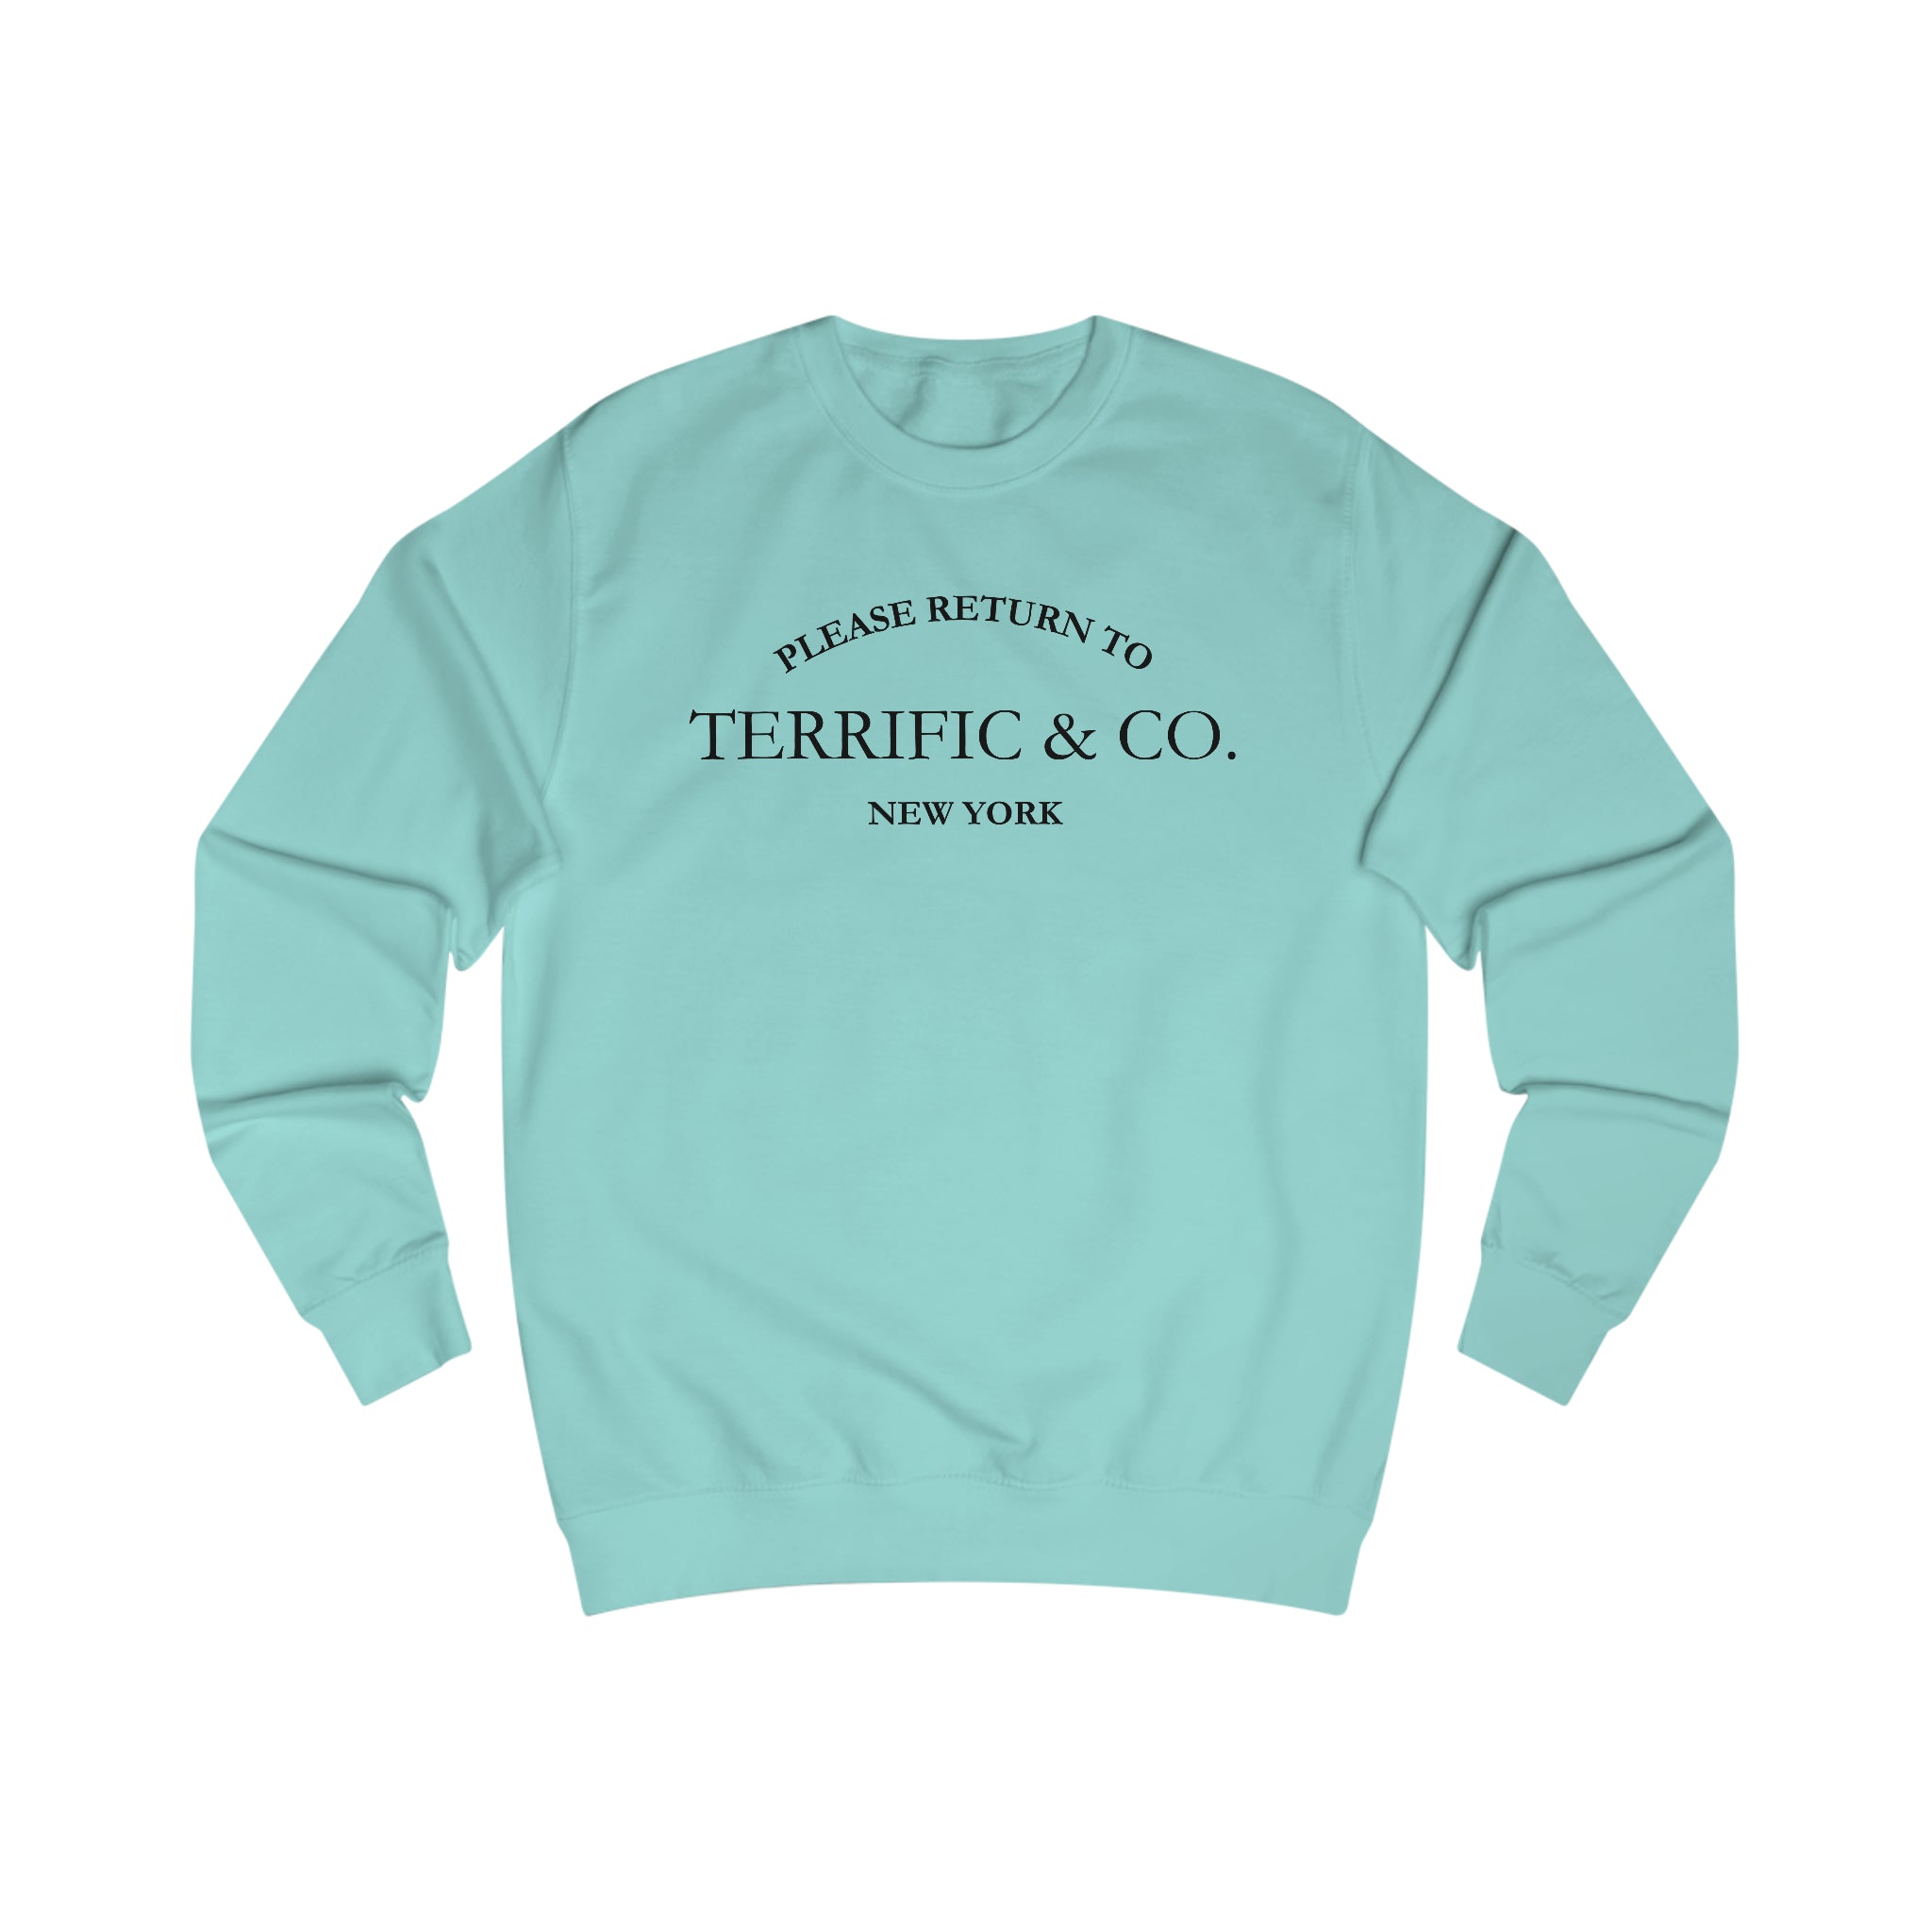 Please Return To Terrific and Co. Designer inspired Relaxed Fit Unisex Sweatshirt, Stylish Graphic Print, Comfy & Trendy Sweatshirt Sweatshirt Peppermint-2XL The Middle Aged Groove